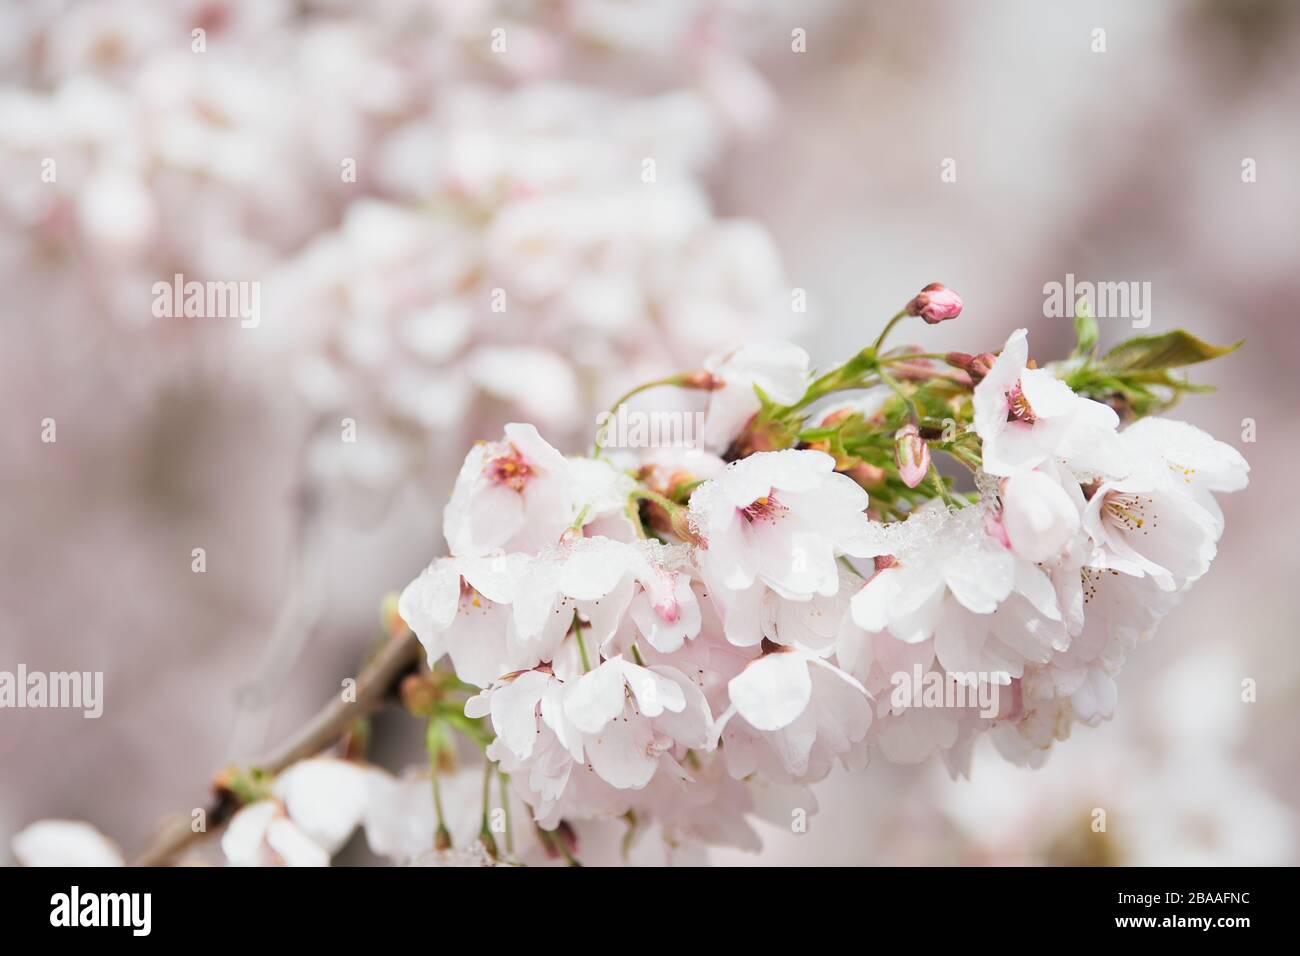 Cherry blossom flowers (Prunus Avium) and buds covered by a white snow mantle. Concept of spring, blooming, sakura festival in Japan and nature Stock Photo